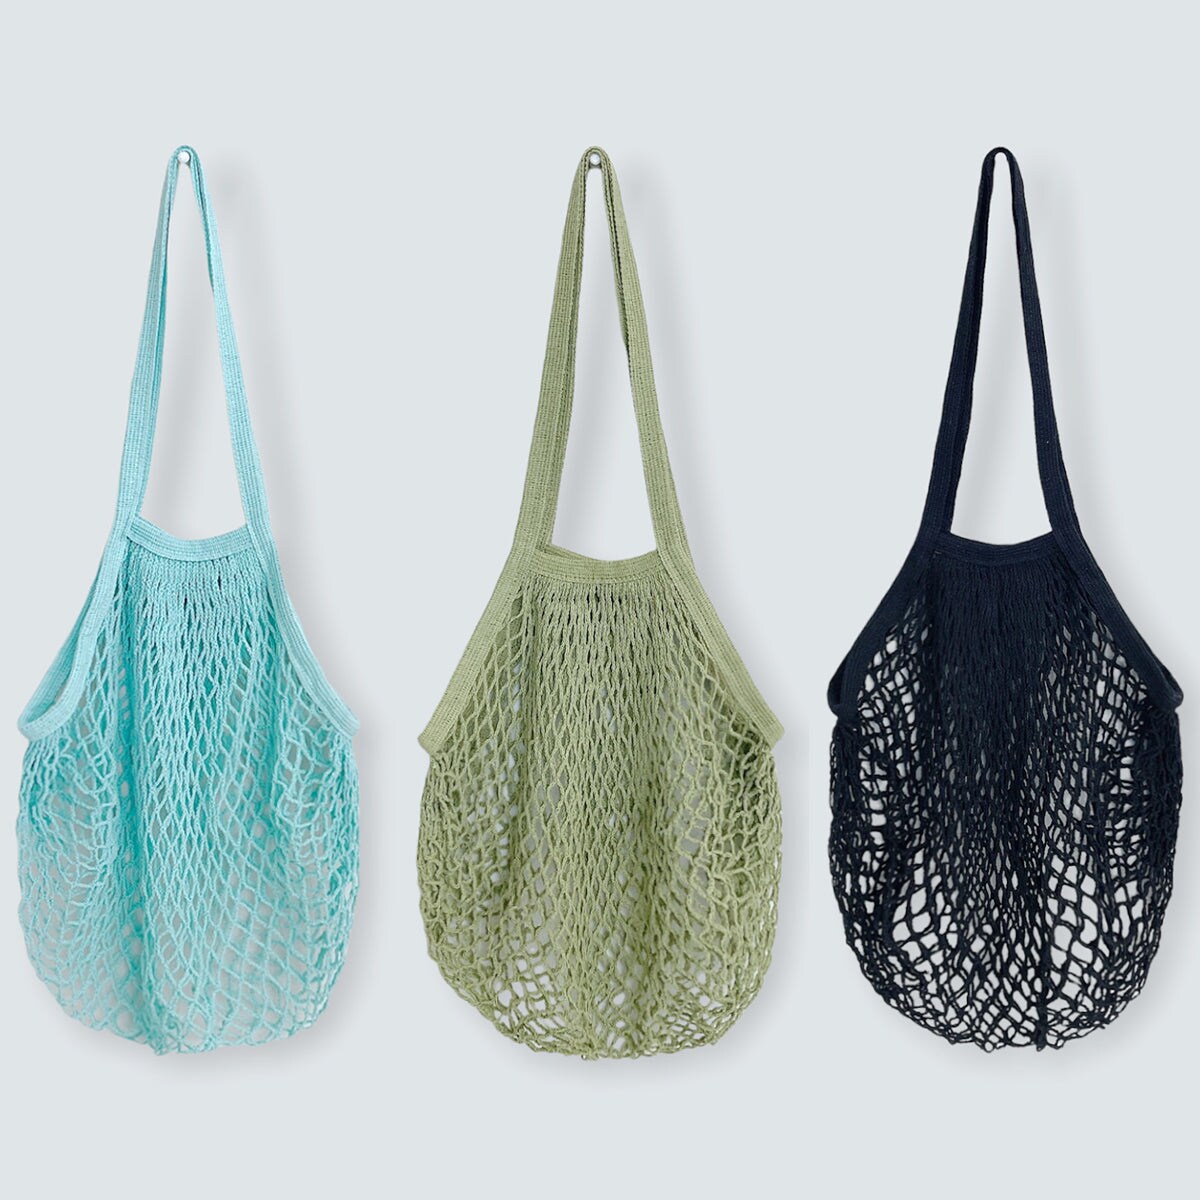 Wrapables Cotton Mesh Net Shopping Bag, Grocery Bag for Vegetables, Produce (Set of 3), Teal, Green, Black